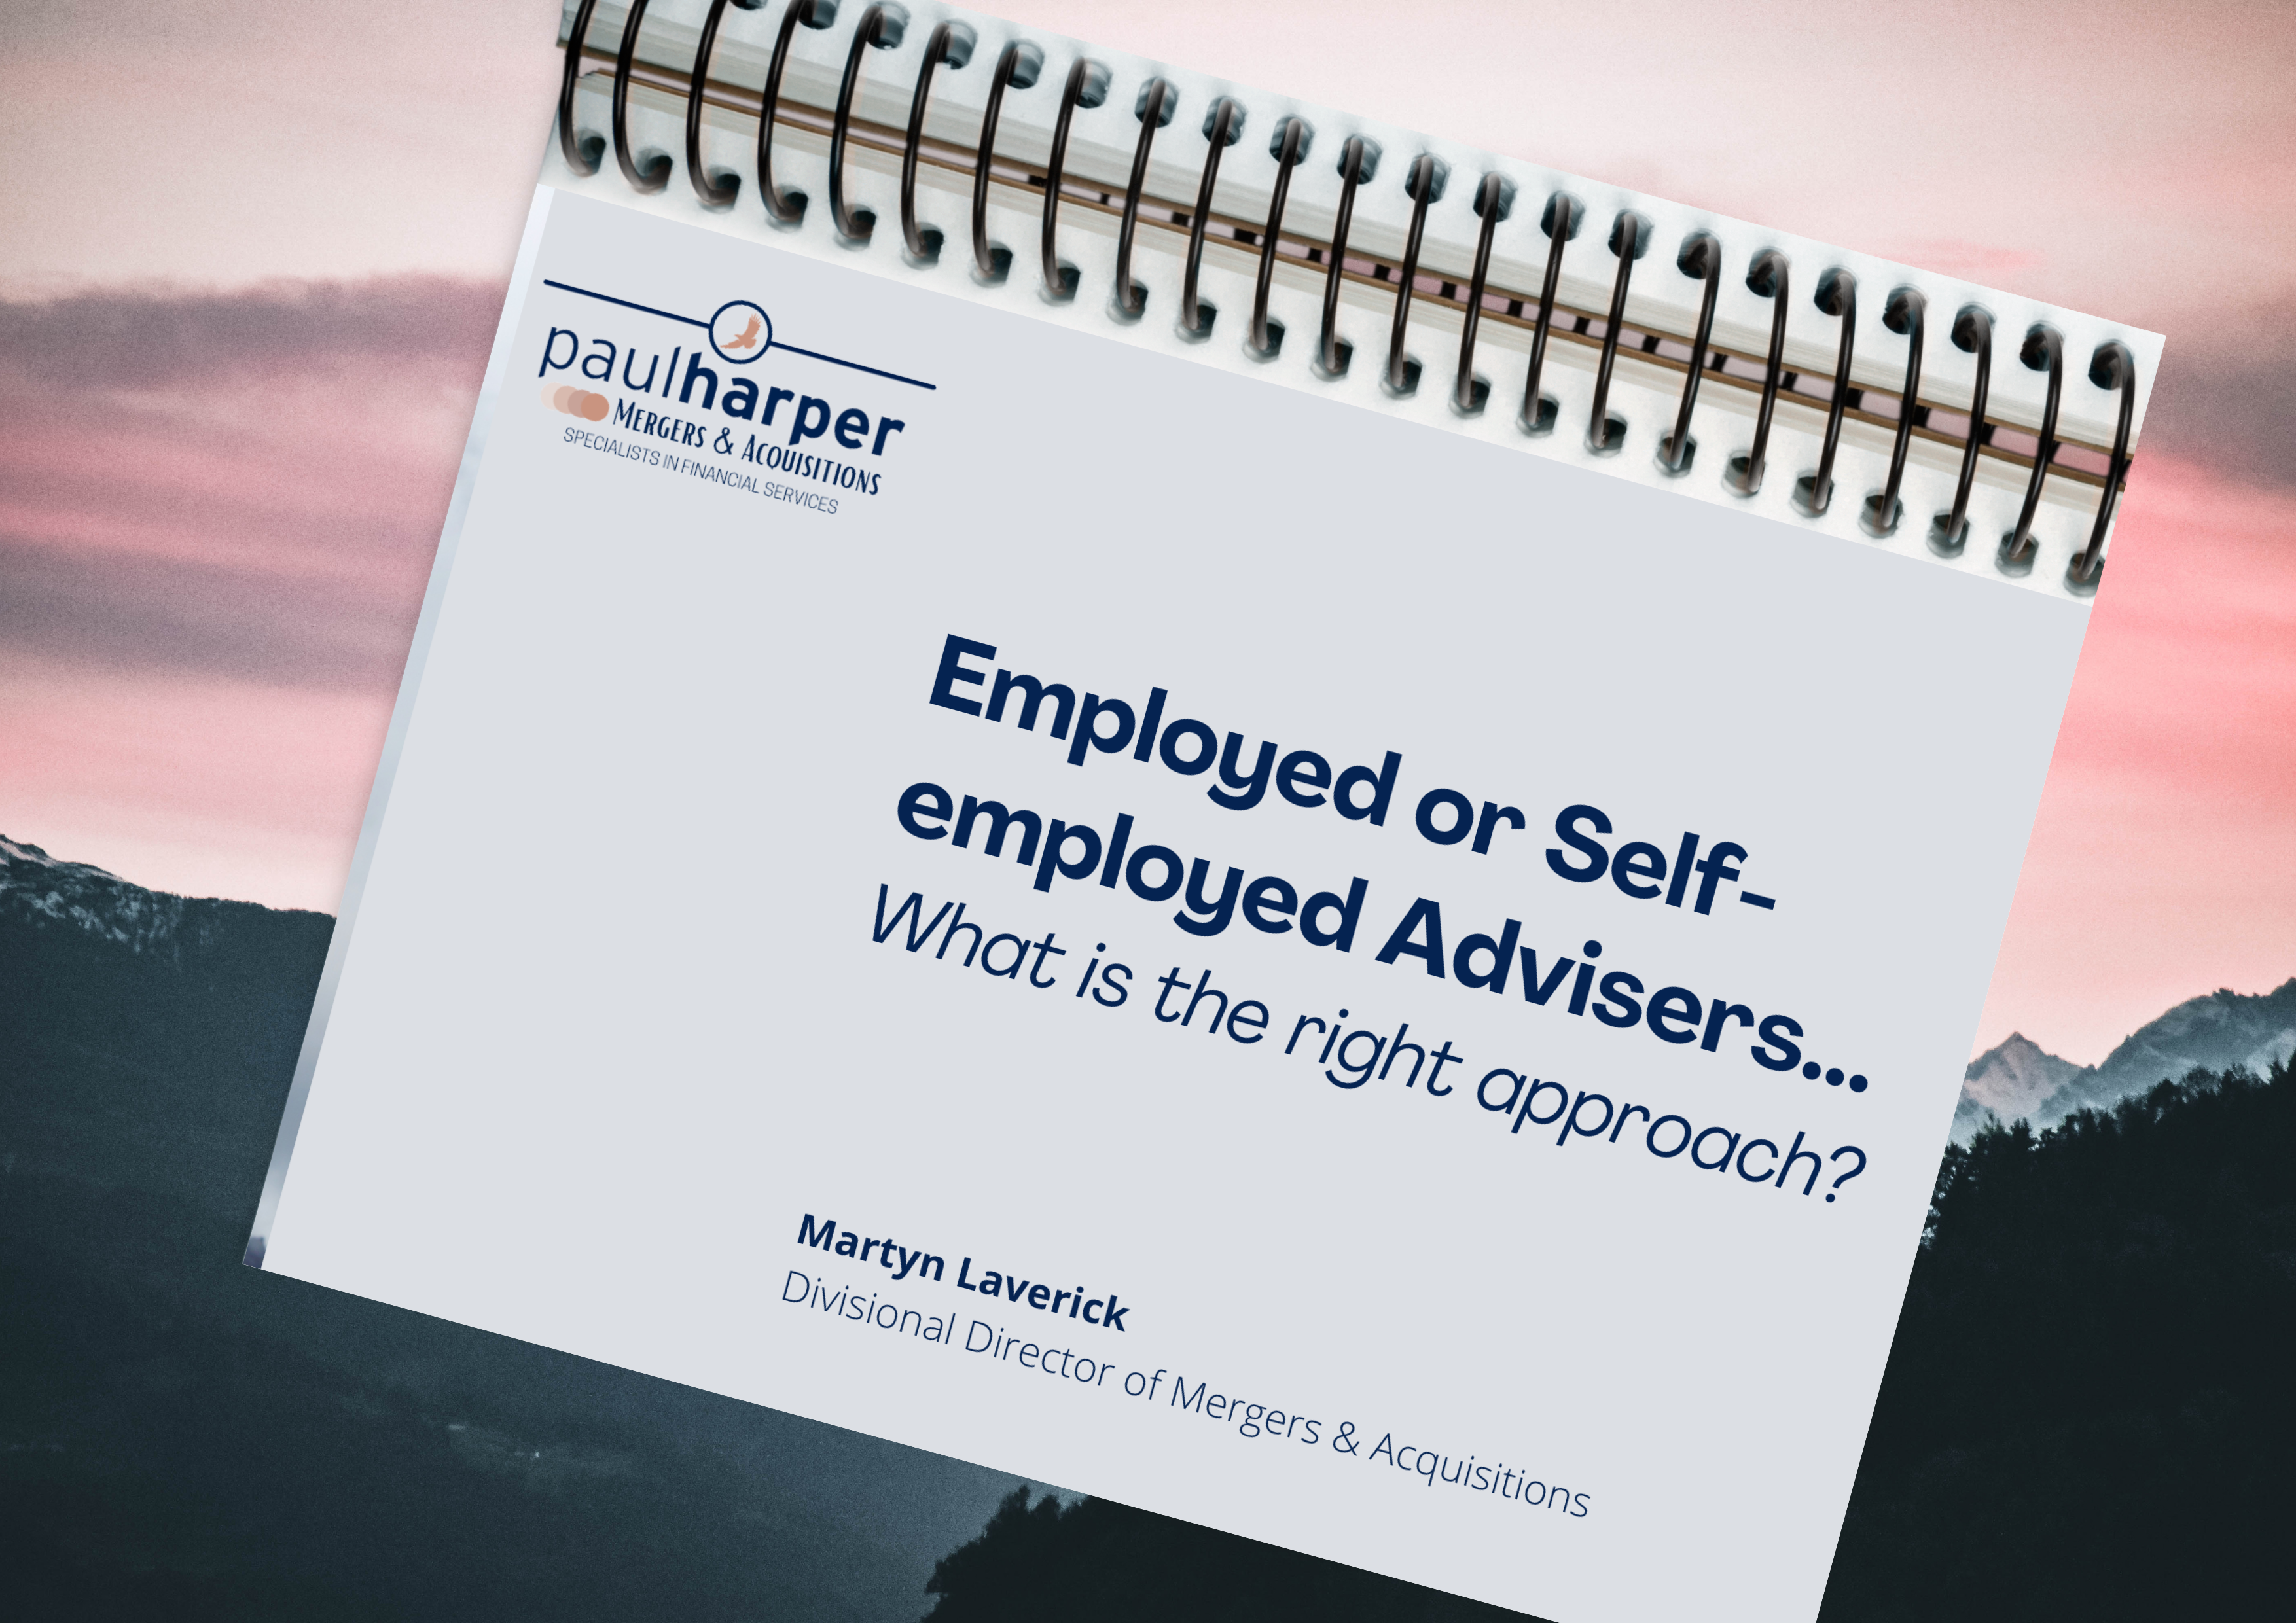 Employed or Self Employed Advisers - What is the right approach?